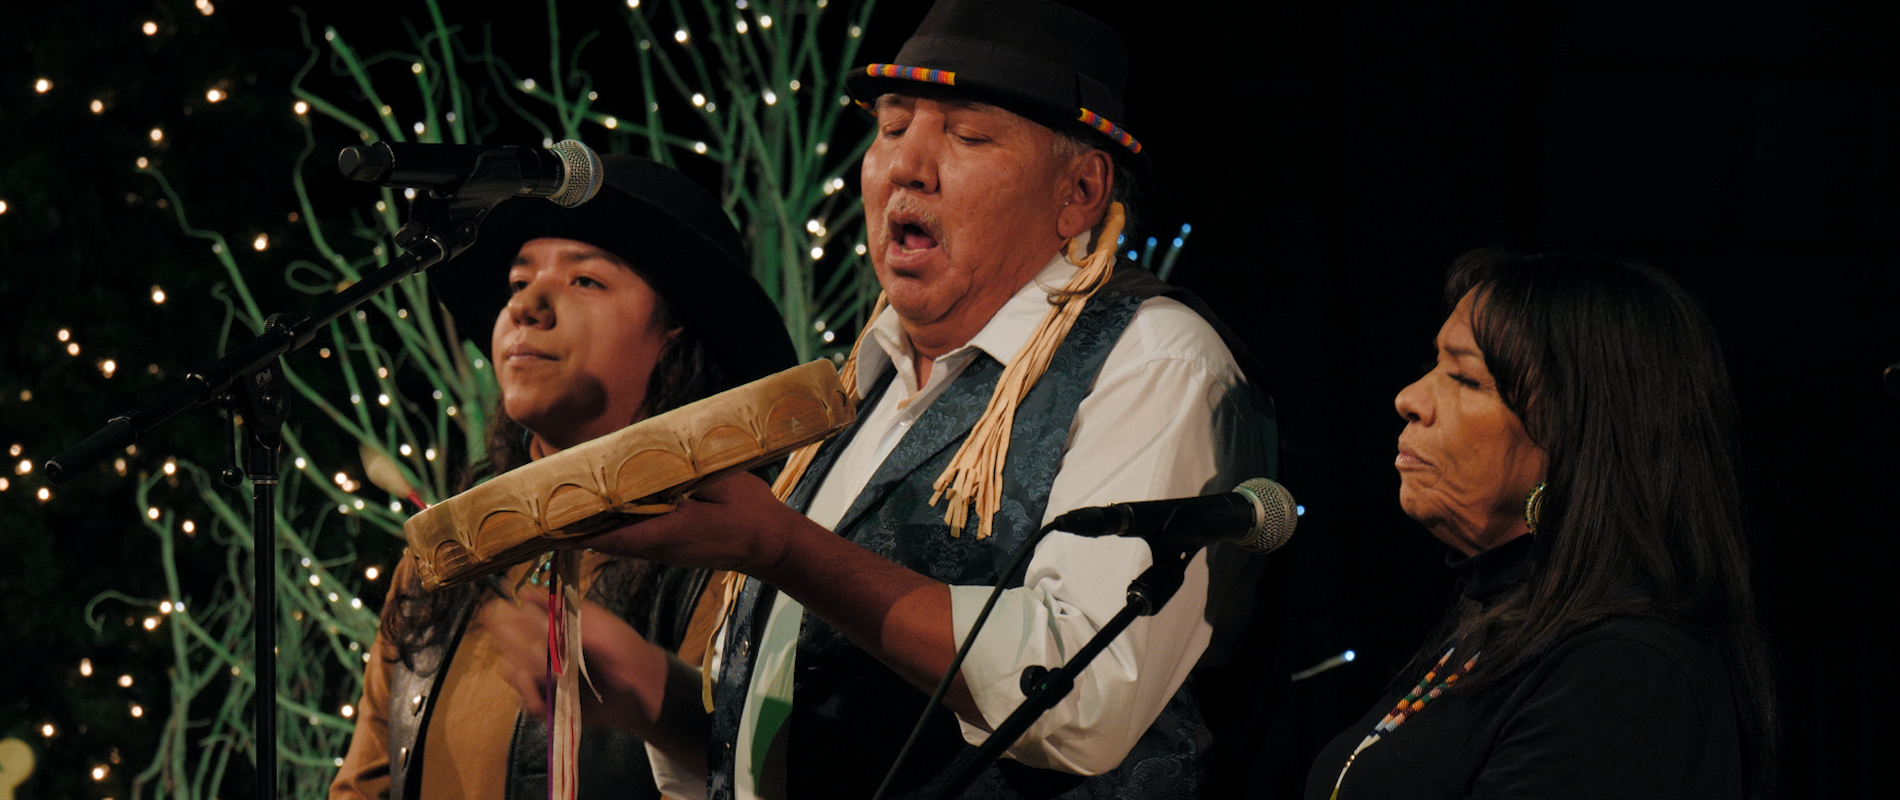 Make Music Matter partners with Kehewin Native Dance Theatre and National Music Centre to deliver new mental health support and empower Indigenous voices in central Alberta